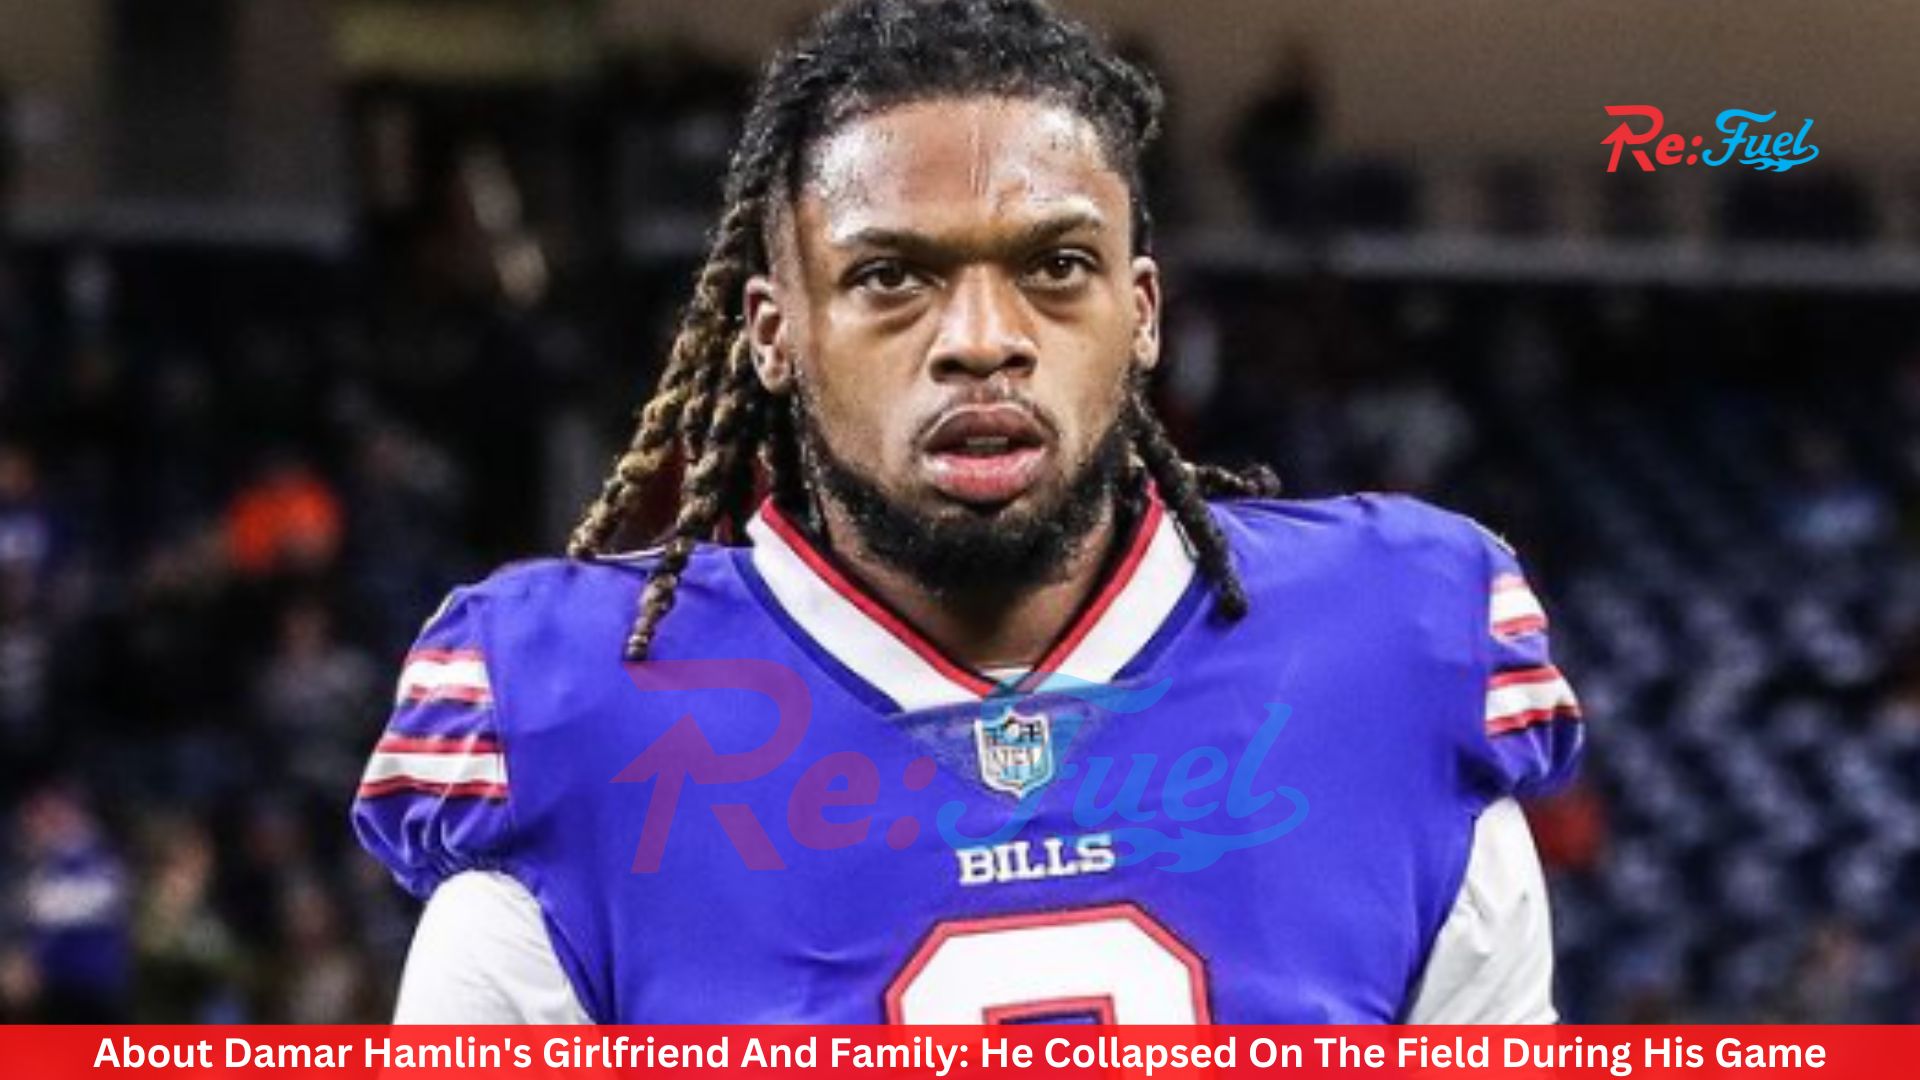 About Damar Hamlin's Girlfriend And Family: He Collapsed On The Field During His Game